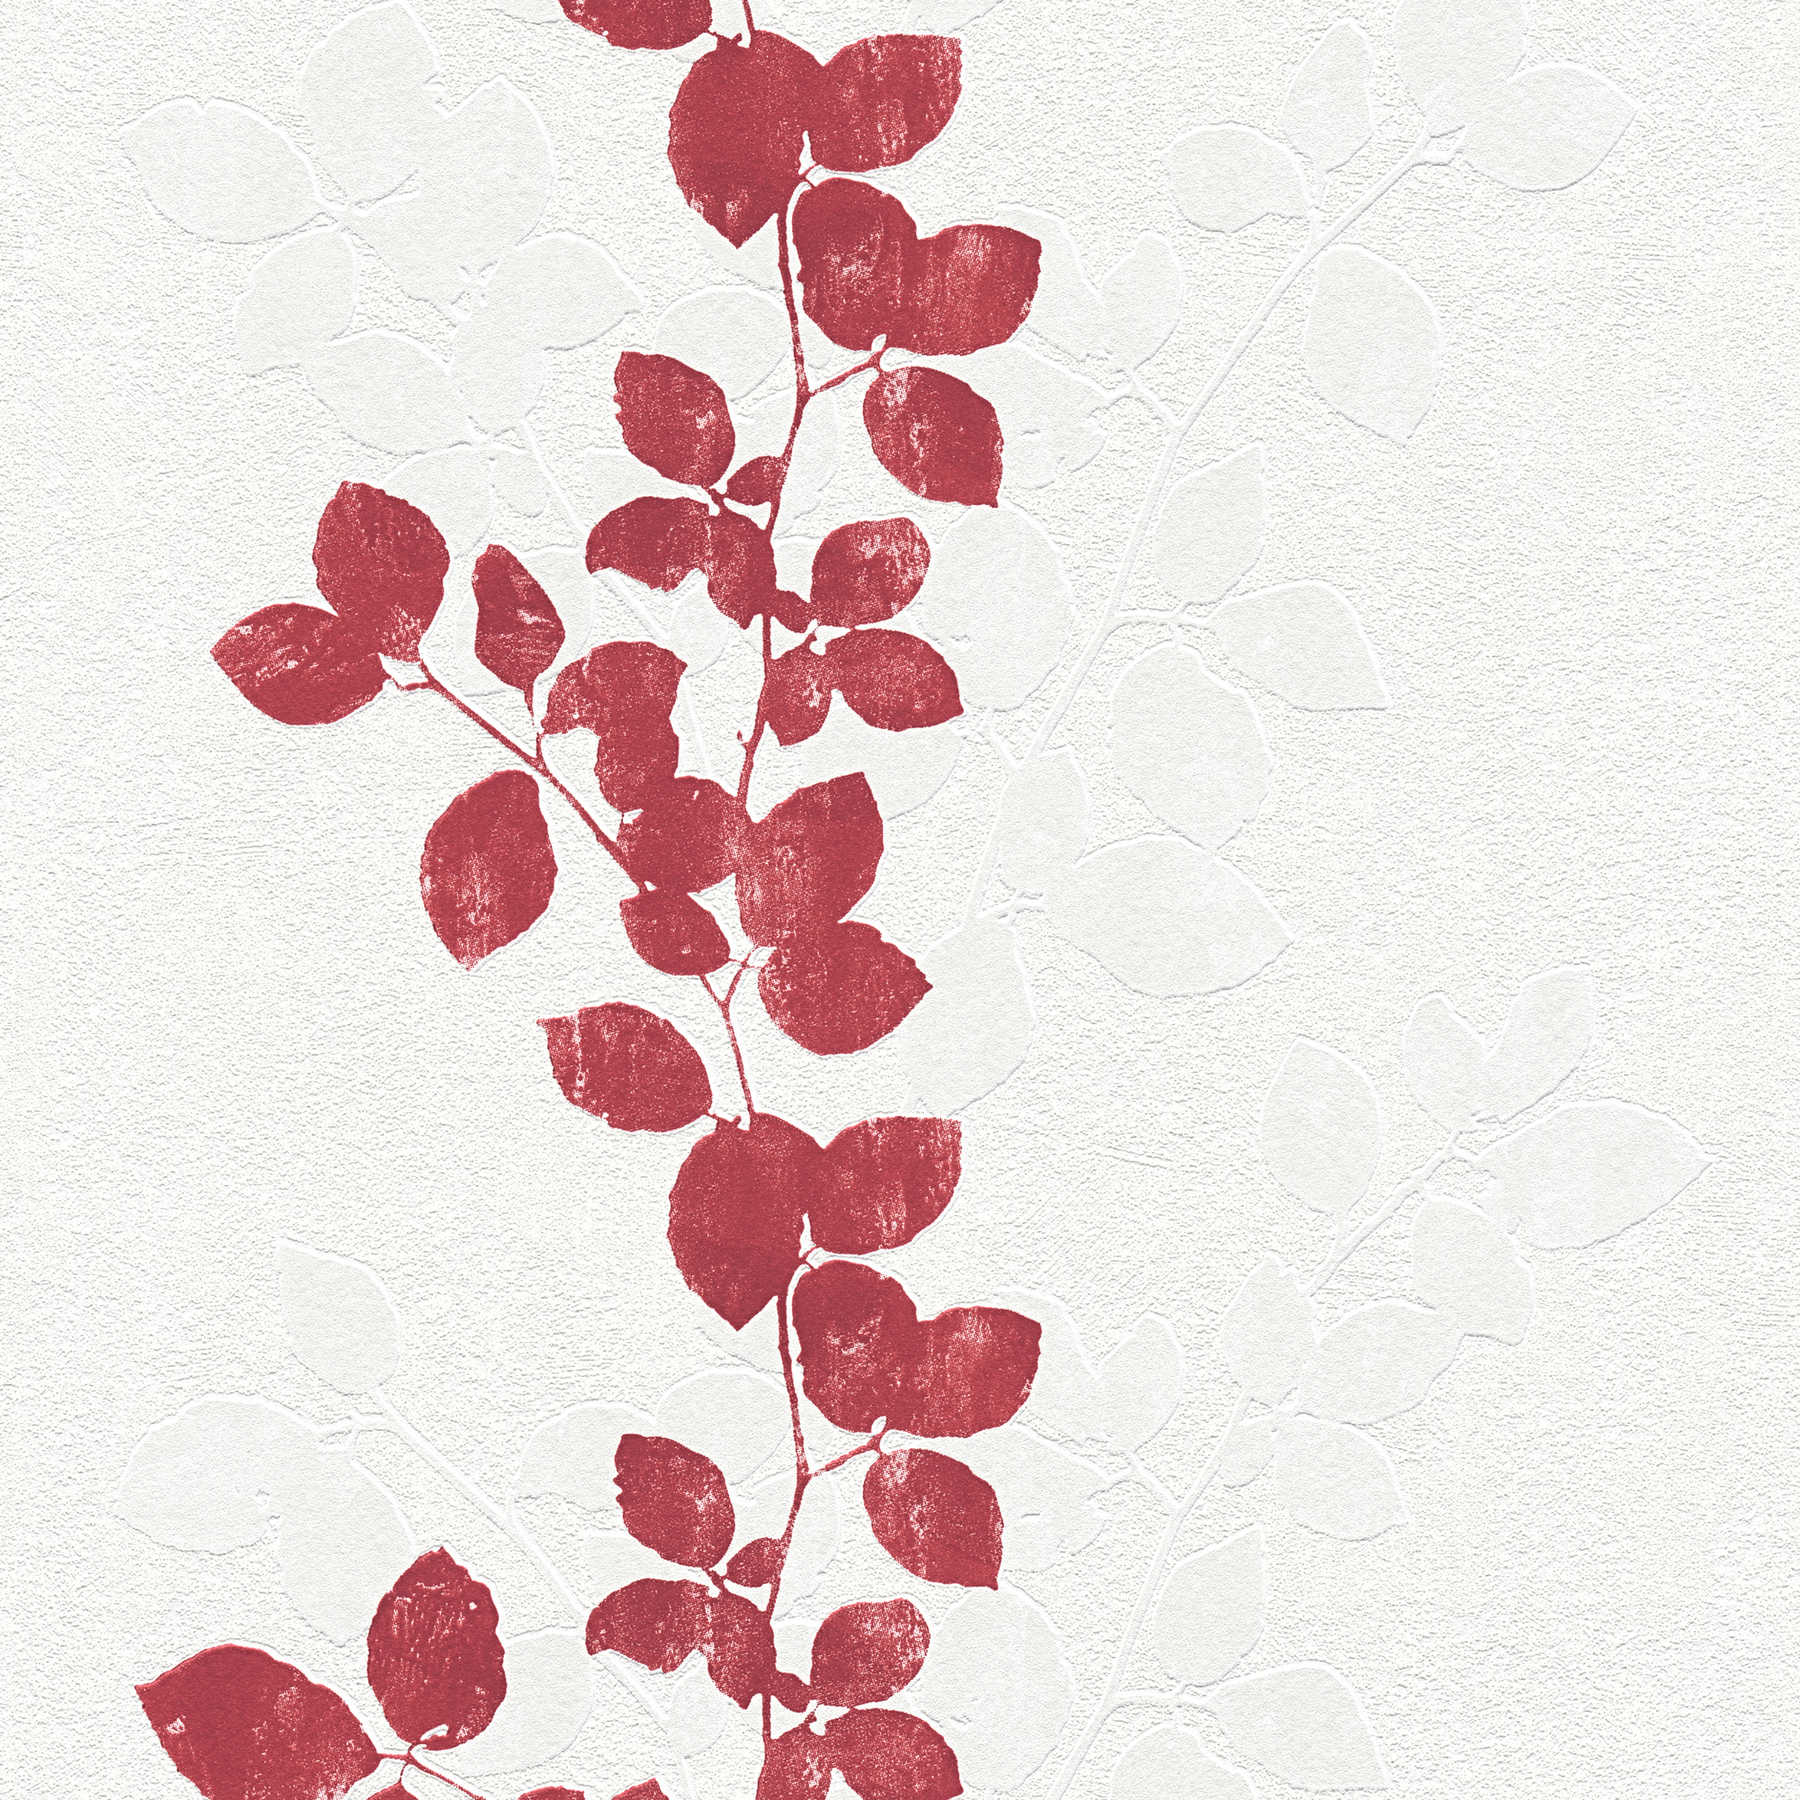             Plaster optics wallpaper with leaf tendrils & texture effect - cream, red
        